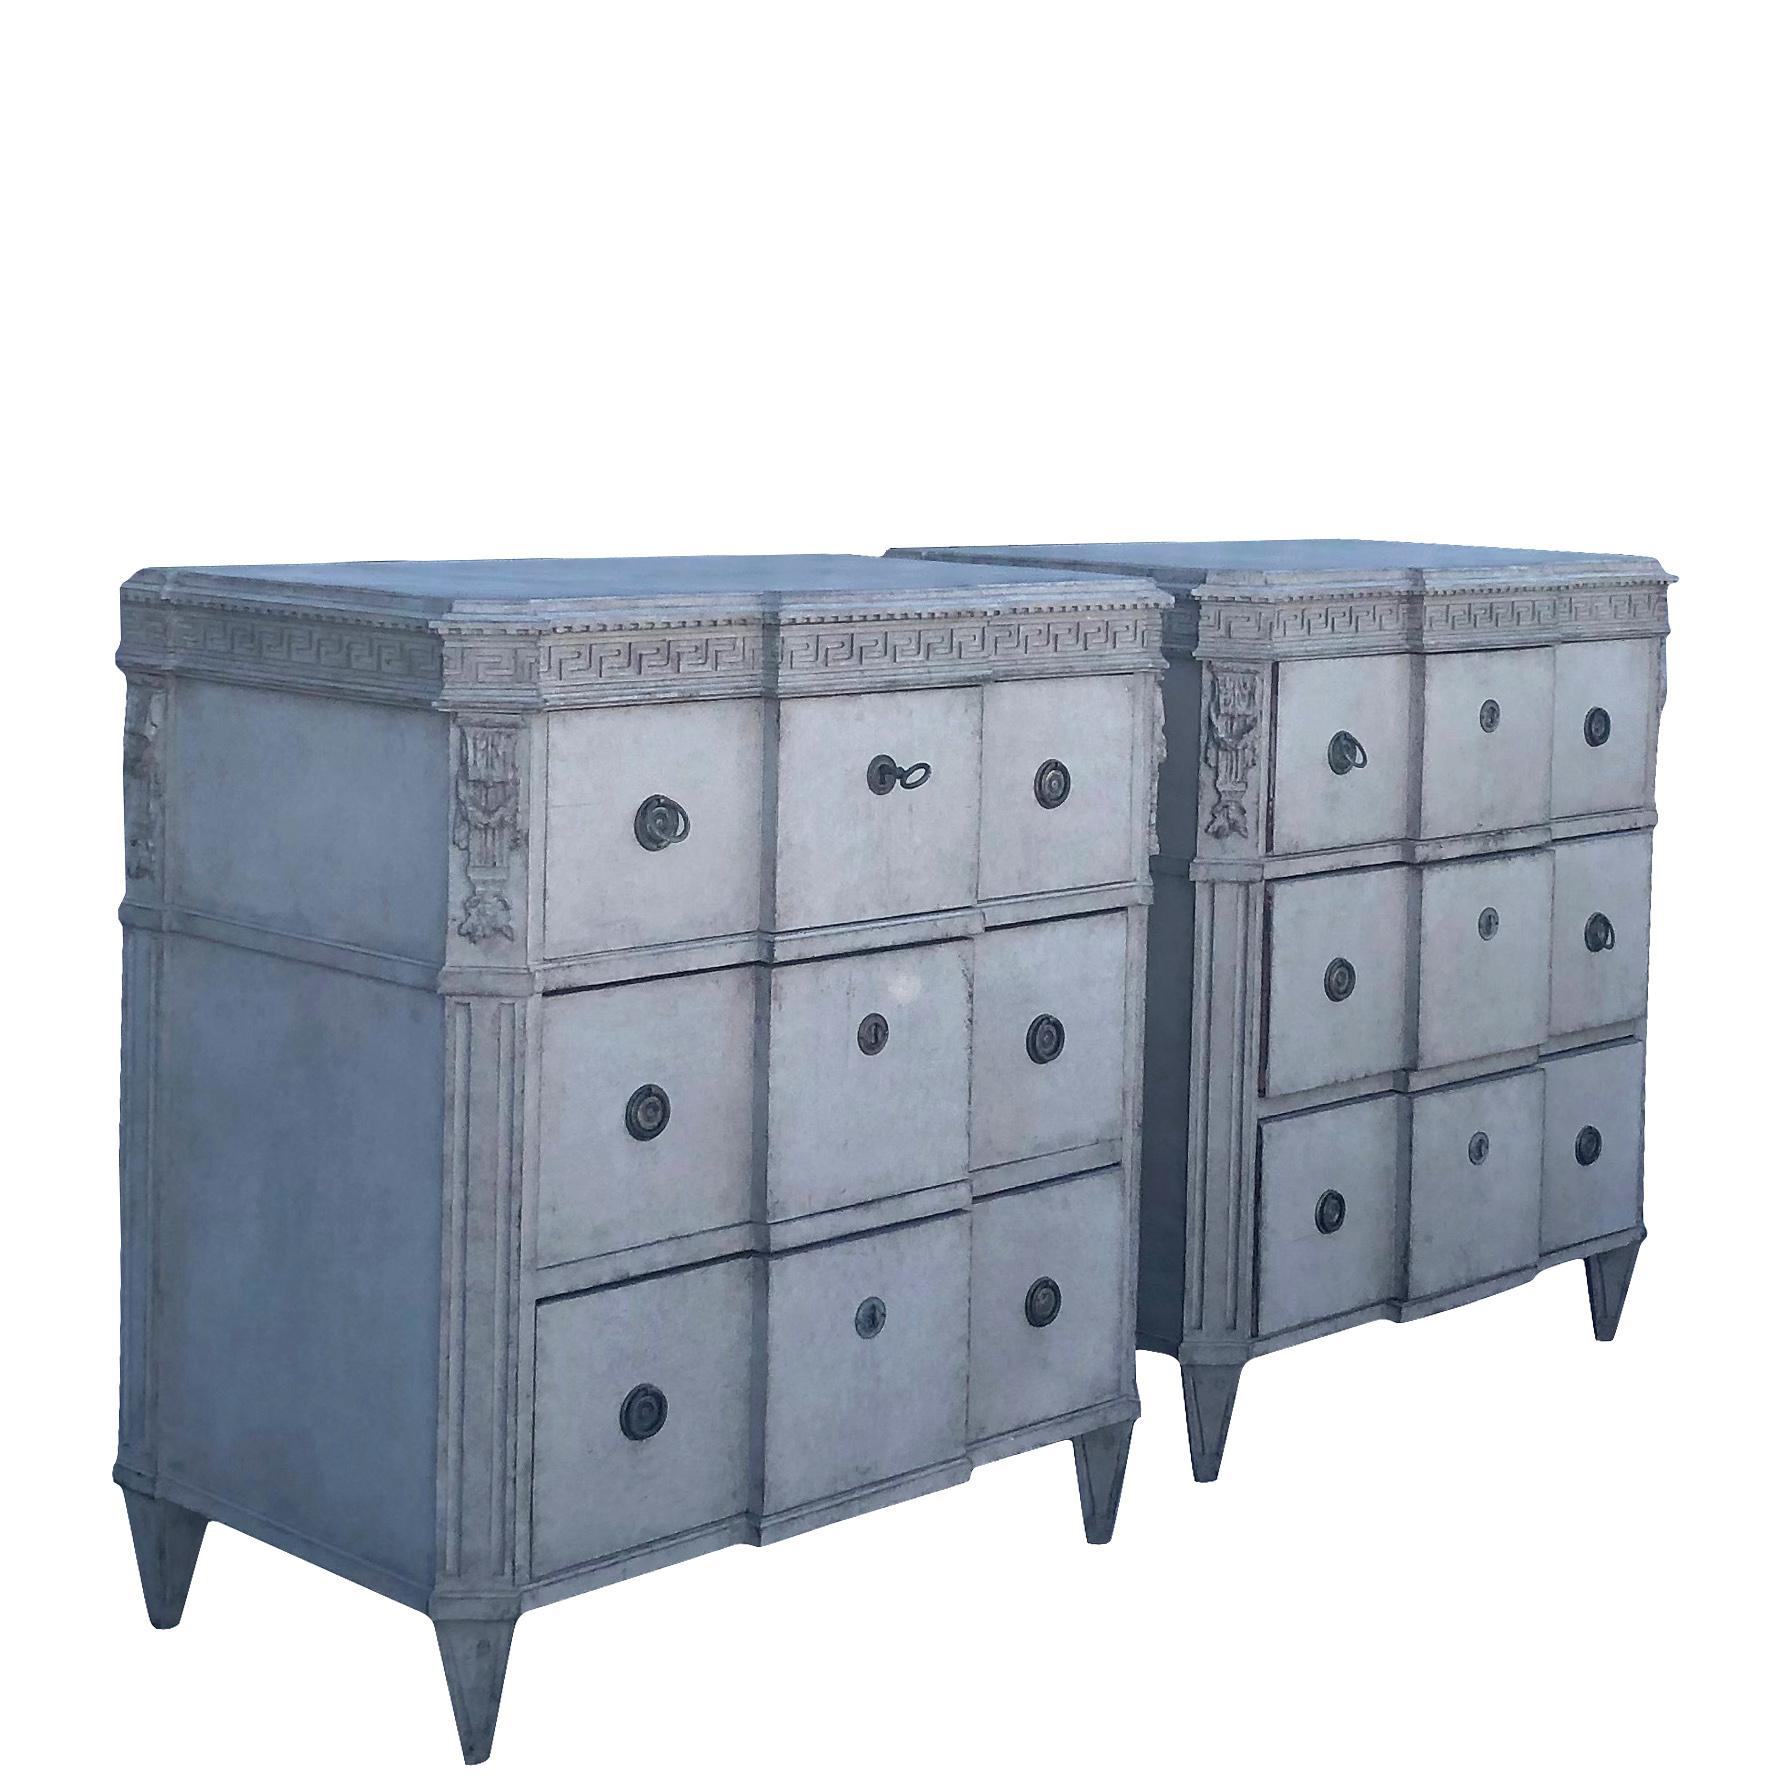 A pair of antique Gustavian neoclassical breakfront chests with three drawers, made of a light grey painted pinewood. The Swedish hand carved chests are in good condition, highly detailed in the Neoclassical Greek style with their original hardware.